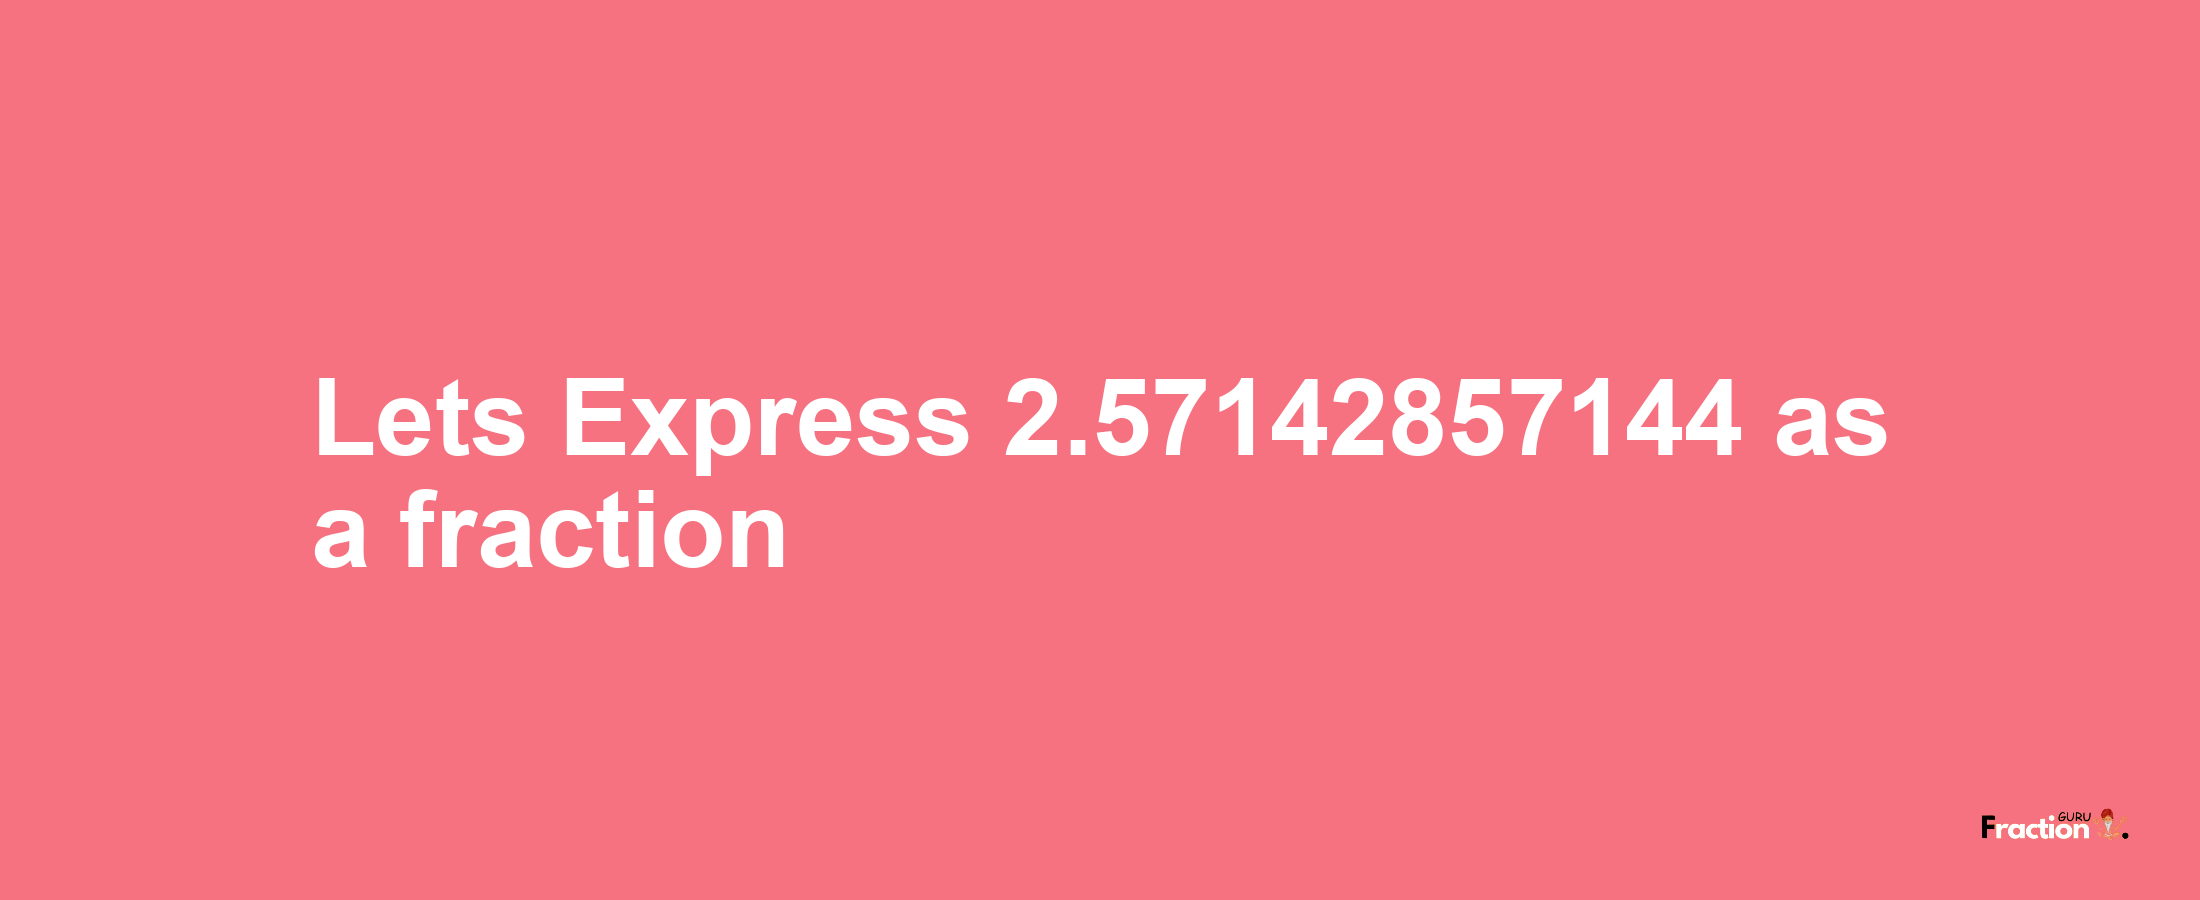 Lets Express 2.57142857144 as afraction